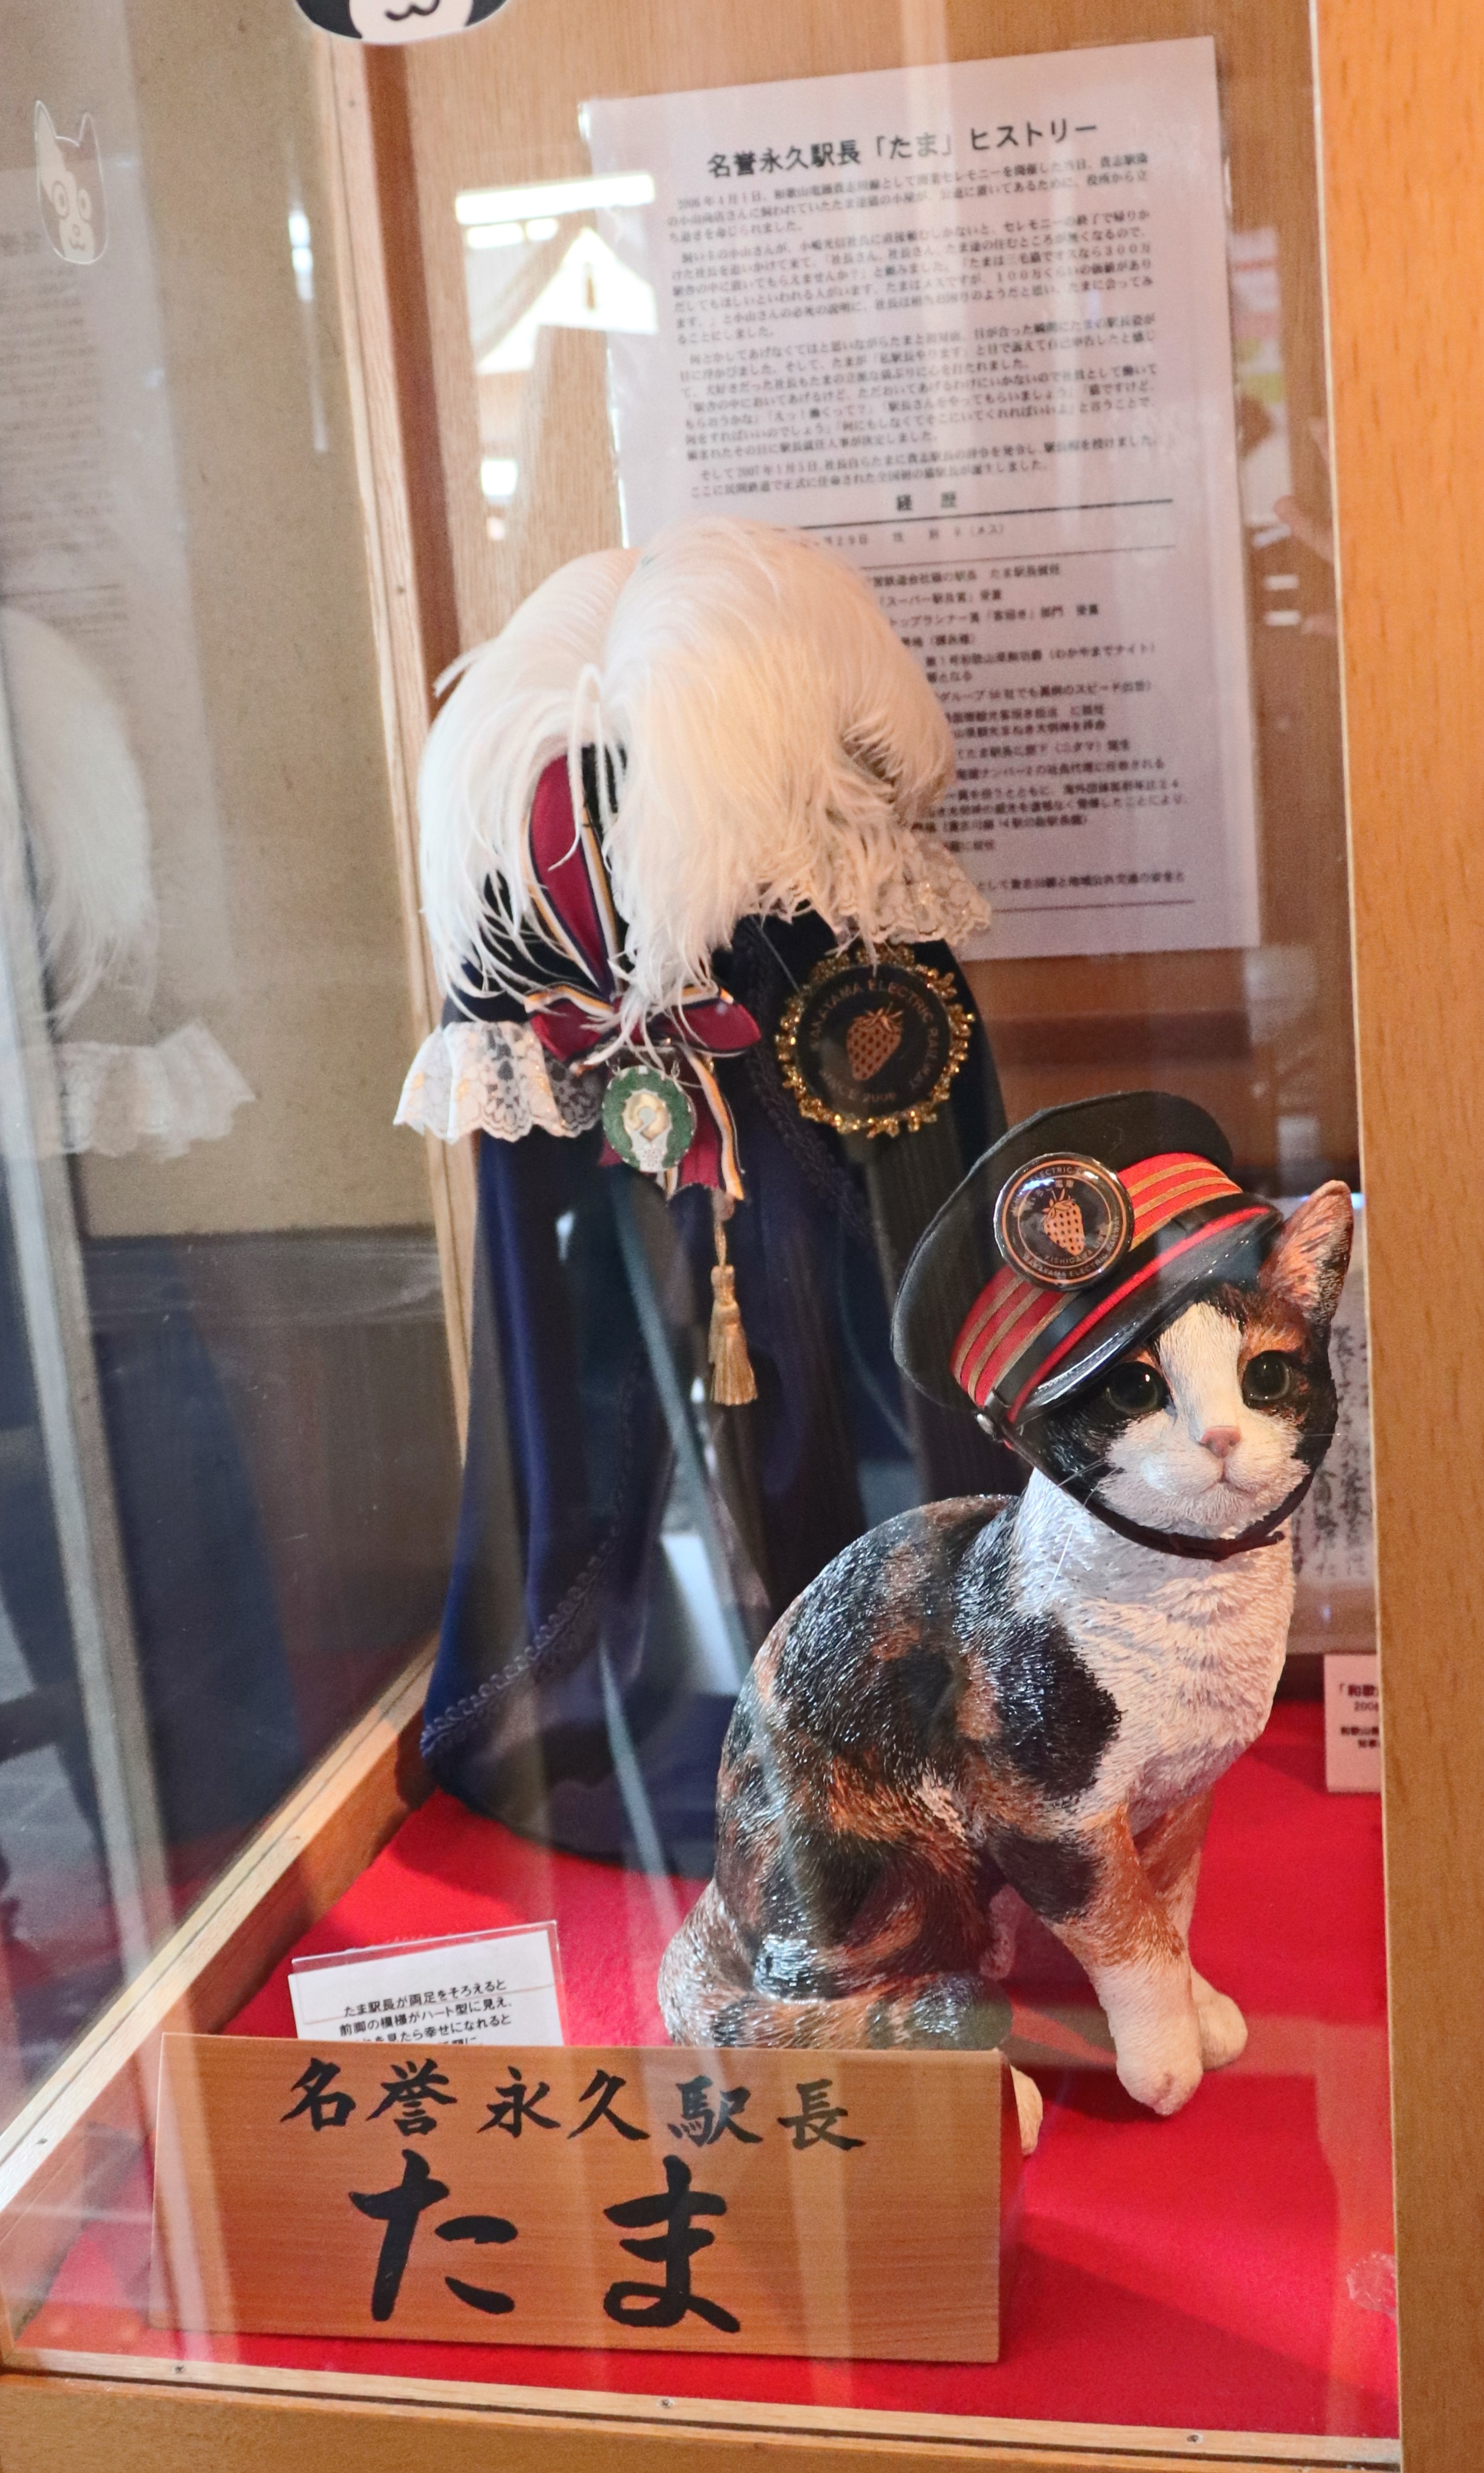 Display of Tama the cat at the Tama Cafe in Kishi Station.